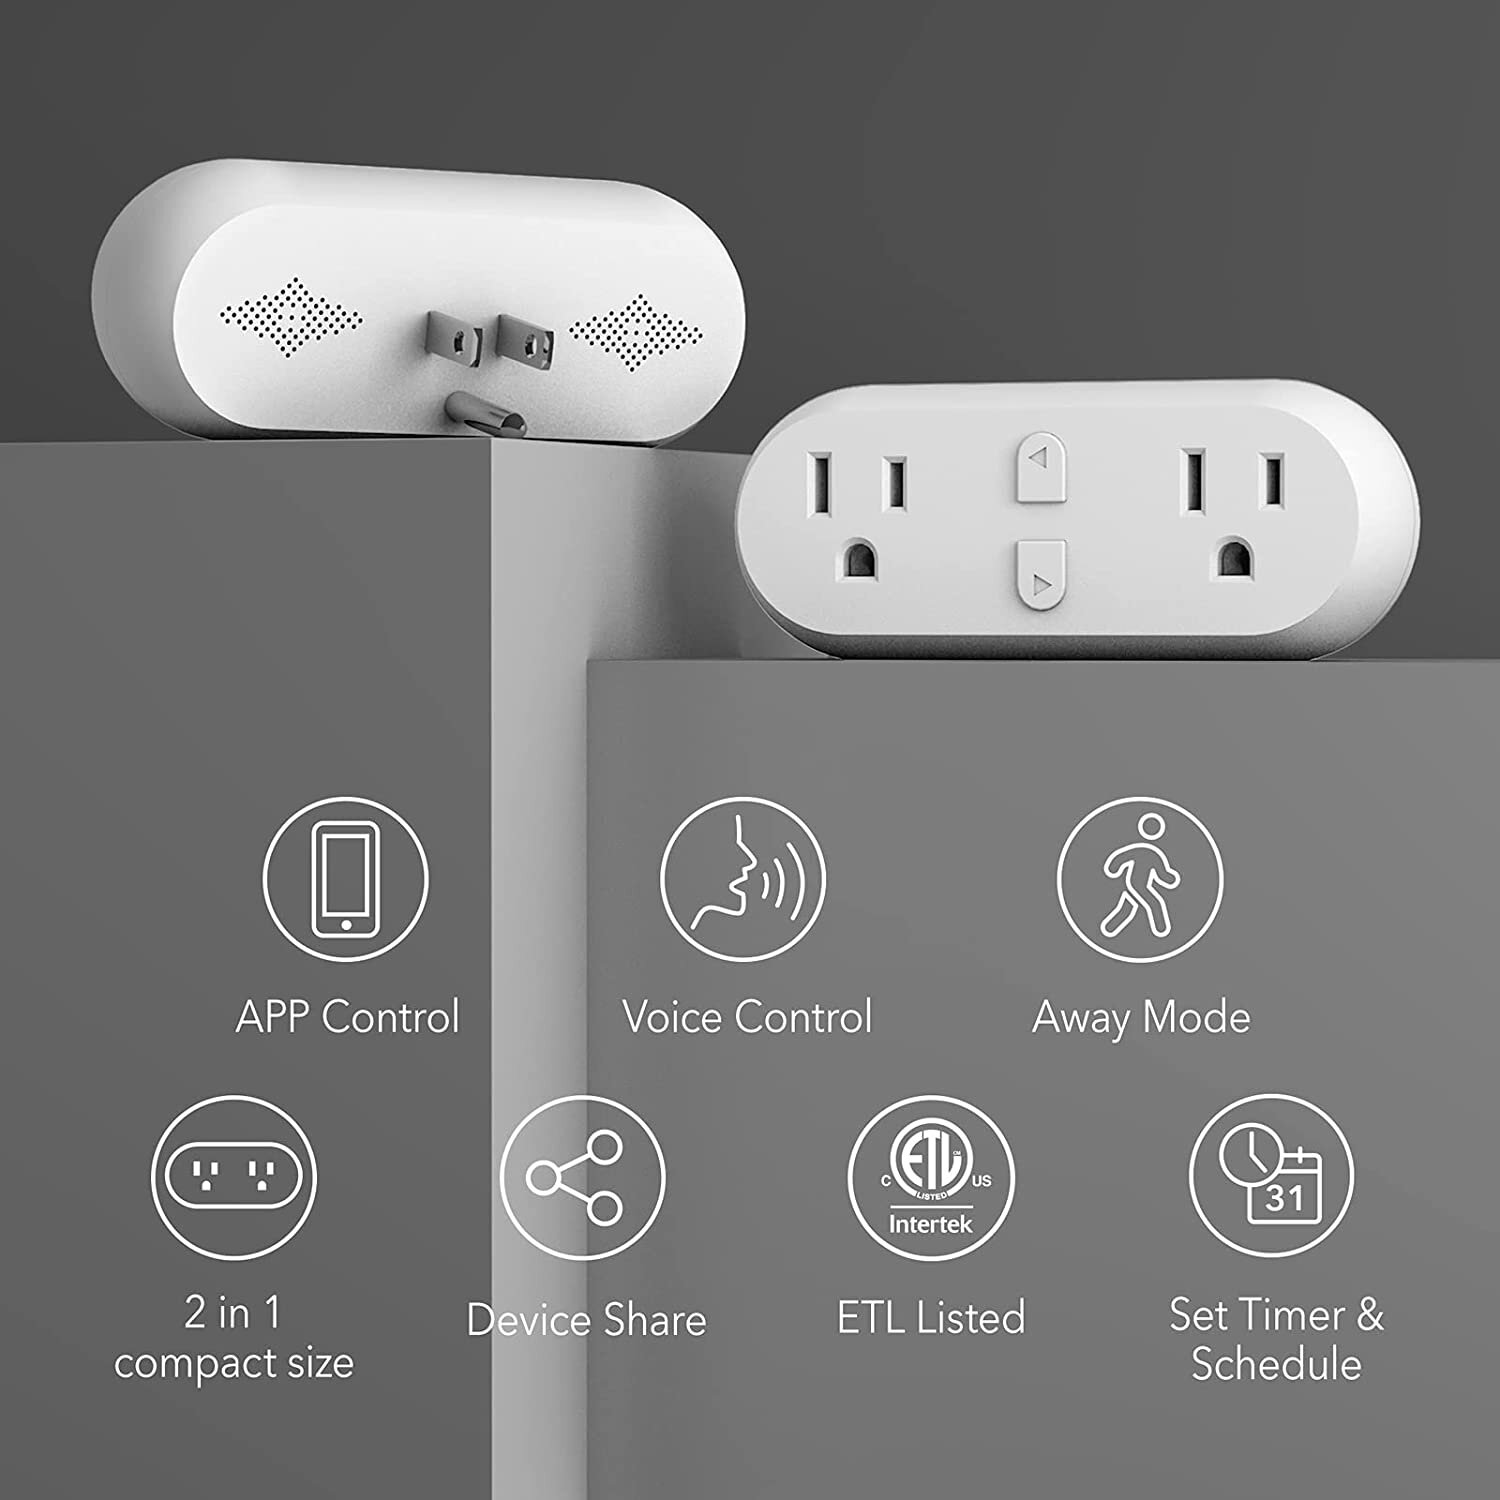 HBN Smart Plug 15A, WiFi&amp;Bluetooth Outlet Extender Dual Socket Plugs Works with Alexa, Google Home Assistant, Remote Control with Timer Function, 2.4G WiFi Only, 1-Pack